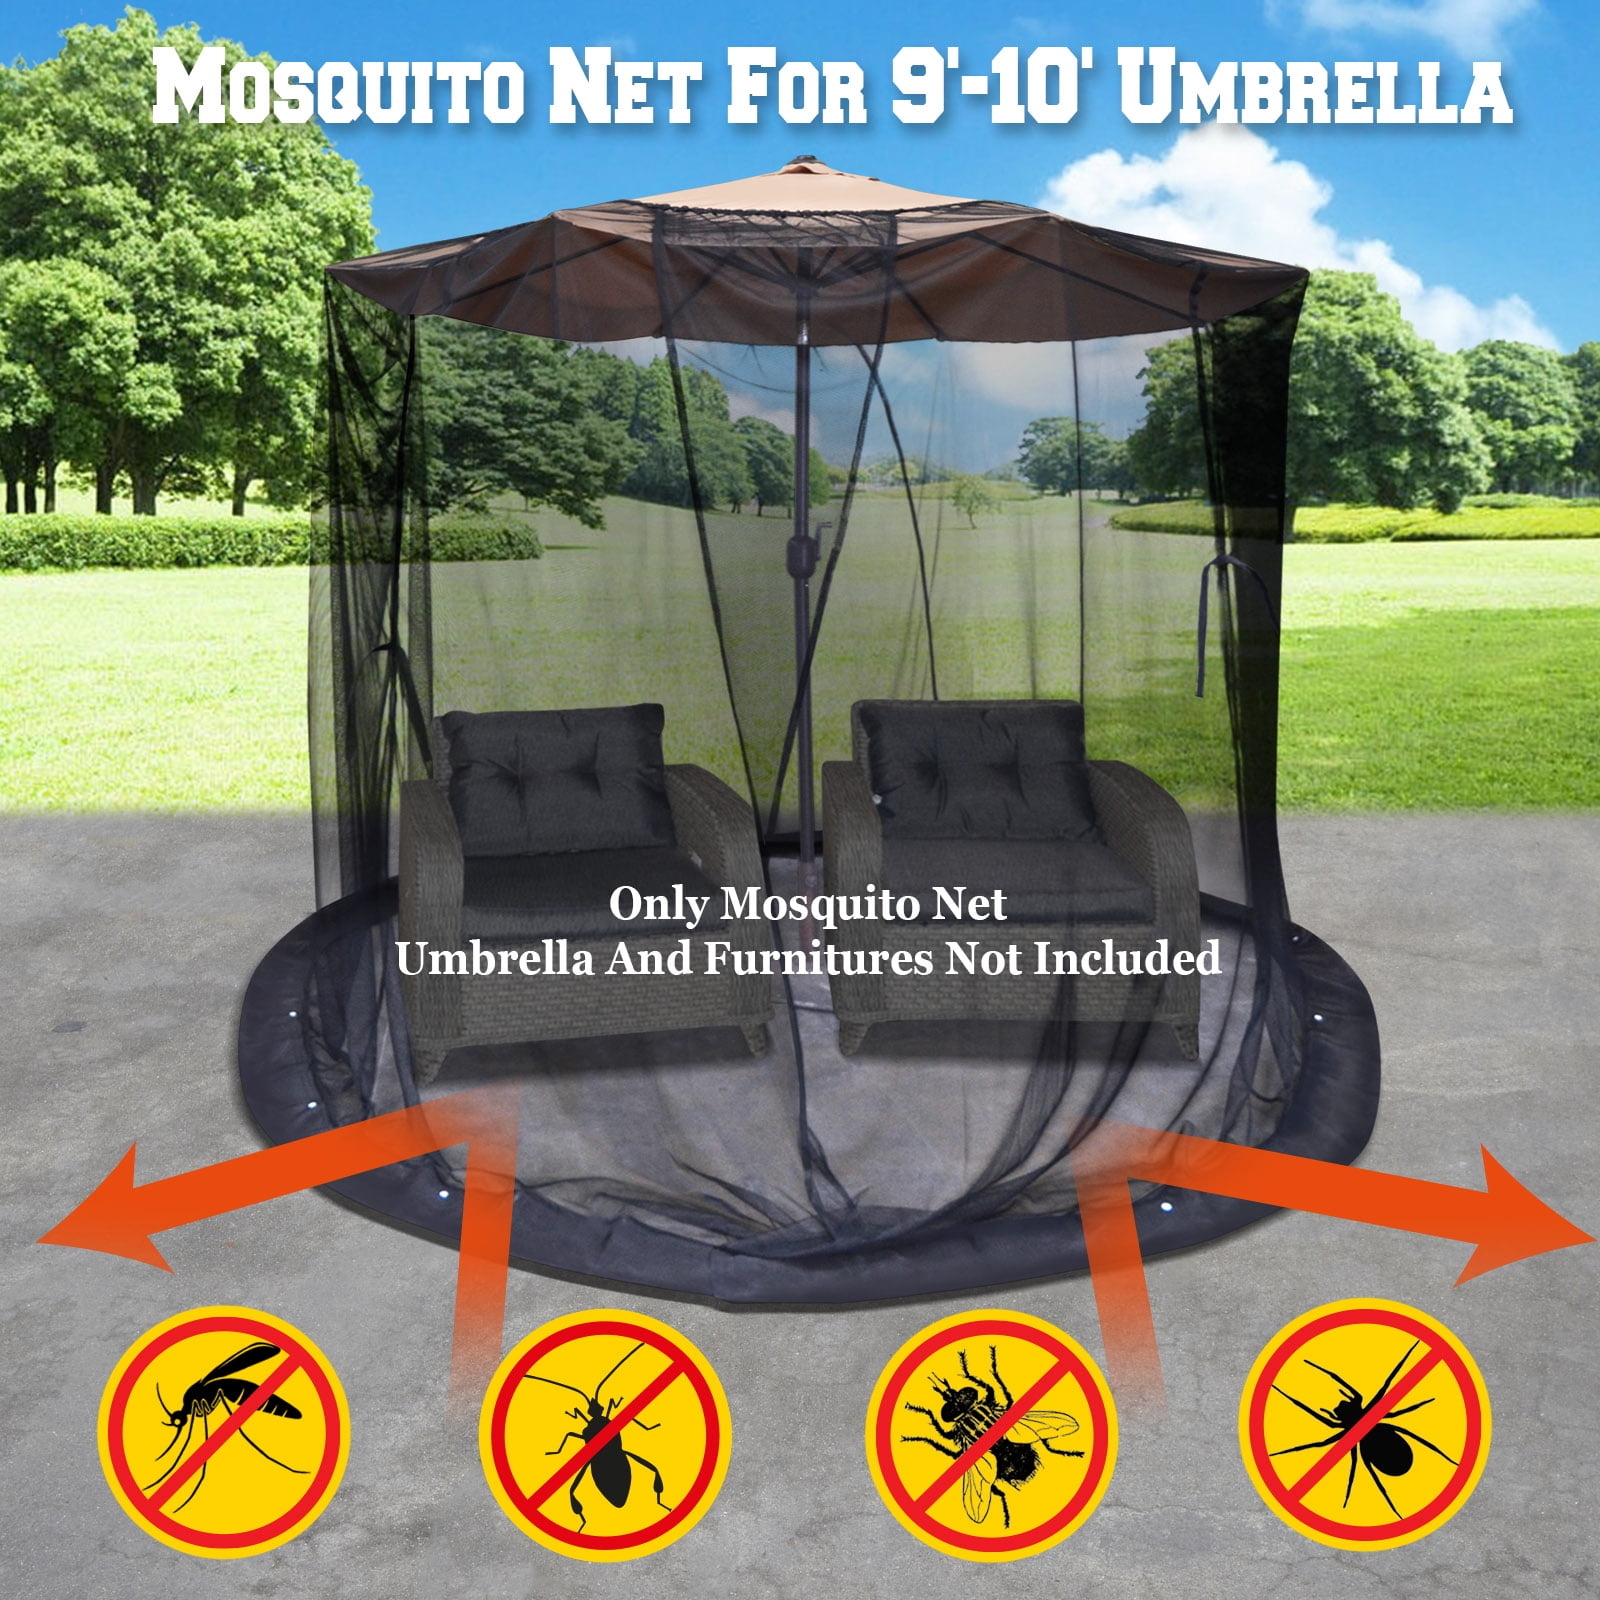 Black SOOSPE-MZ 10 Feet Mosquito Net for Patio Installed in Square Patio Umbrella Water Injection Type Wind and Mosquito Net